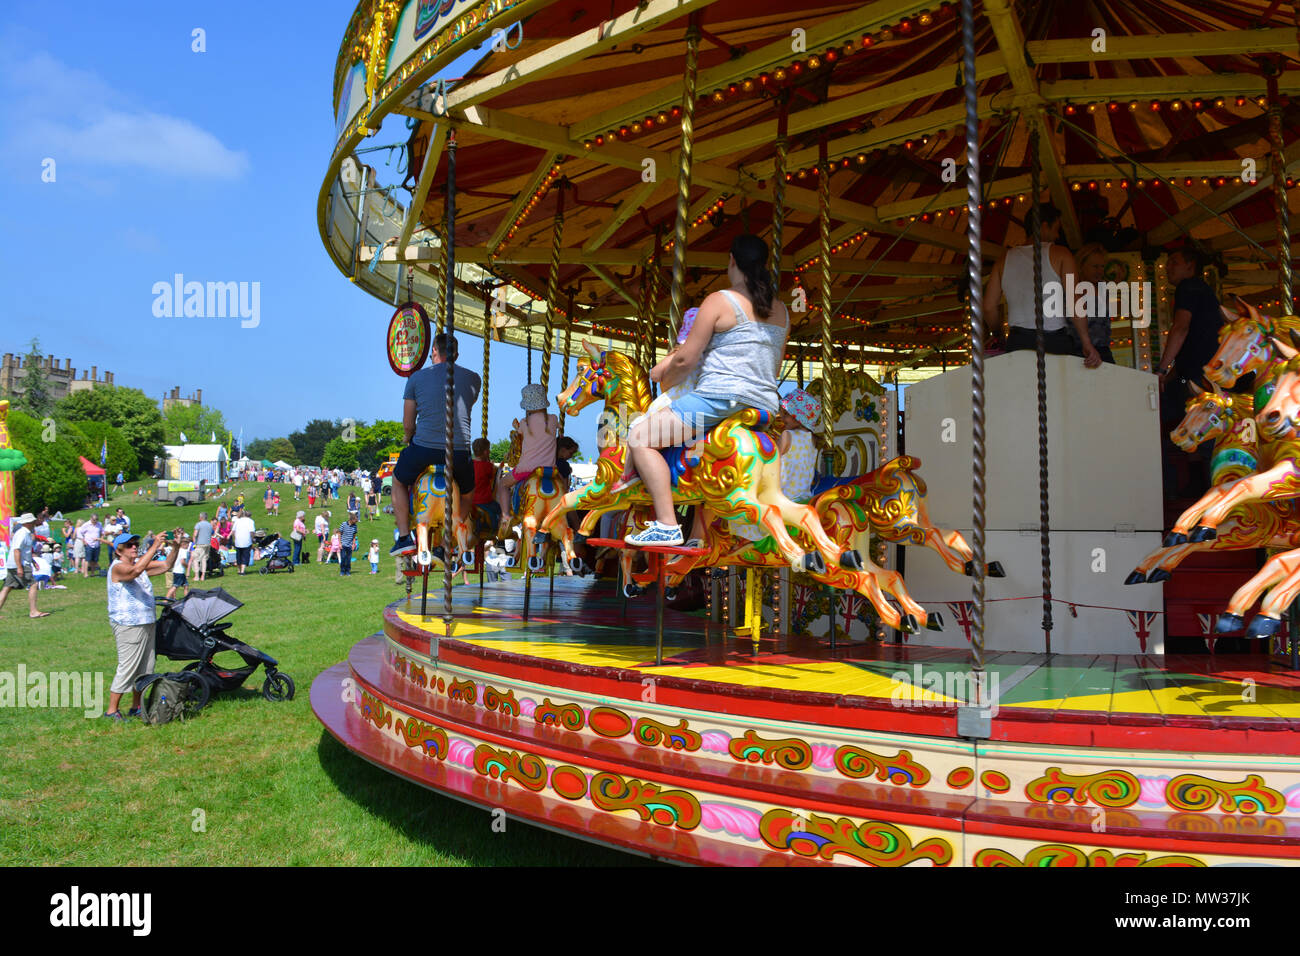 Merry-go-round at the annual Sherborne Castle Country Fair, Sherborne, Dorset, England Stock Photo